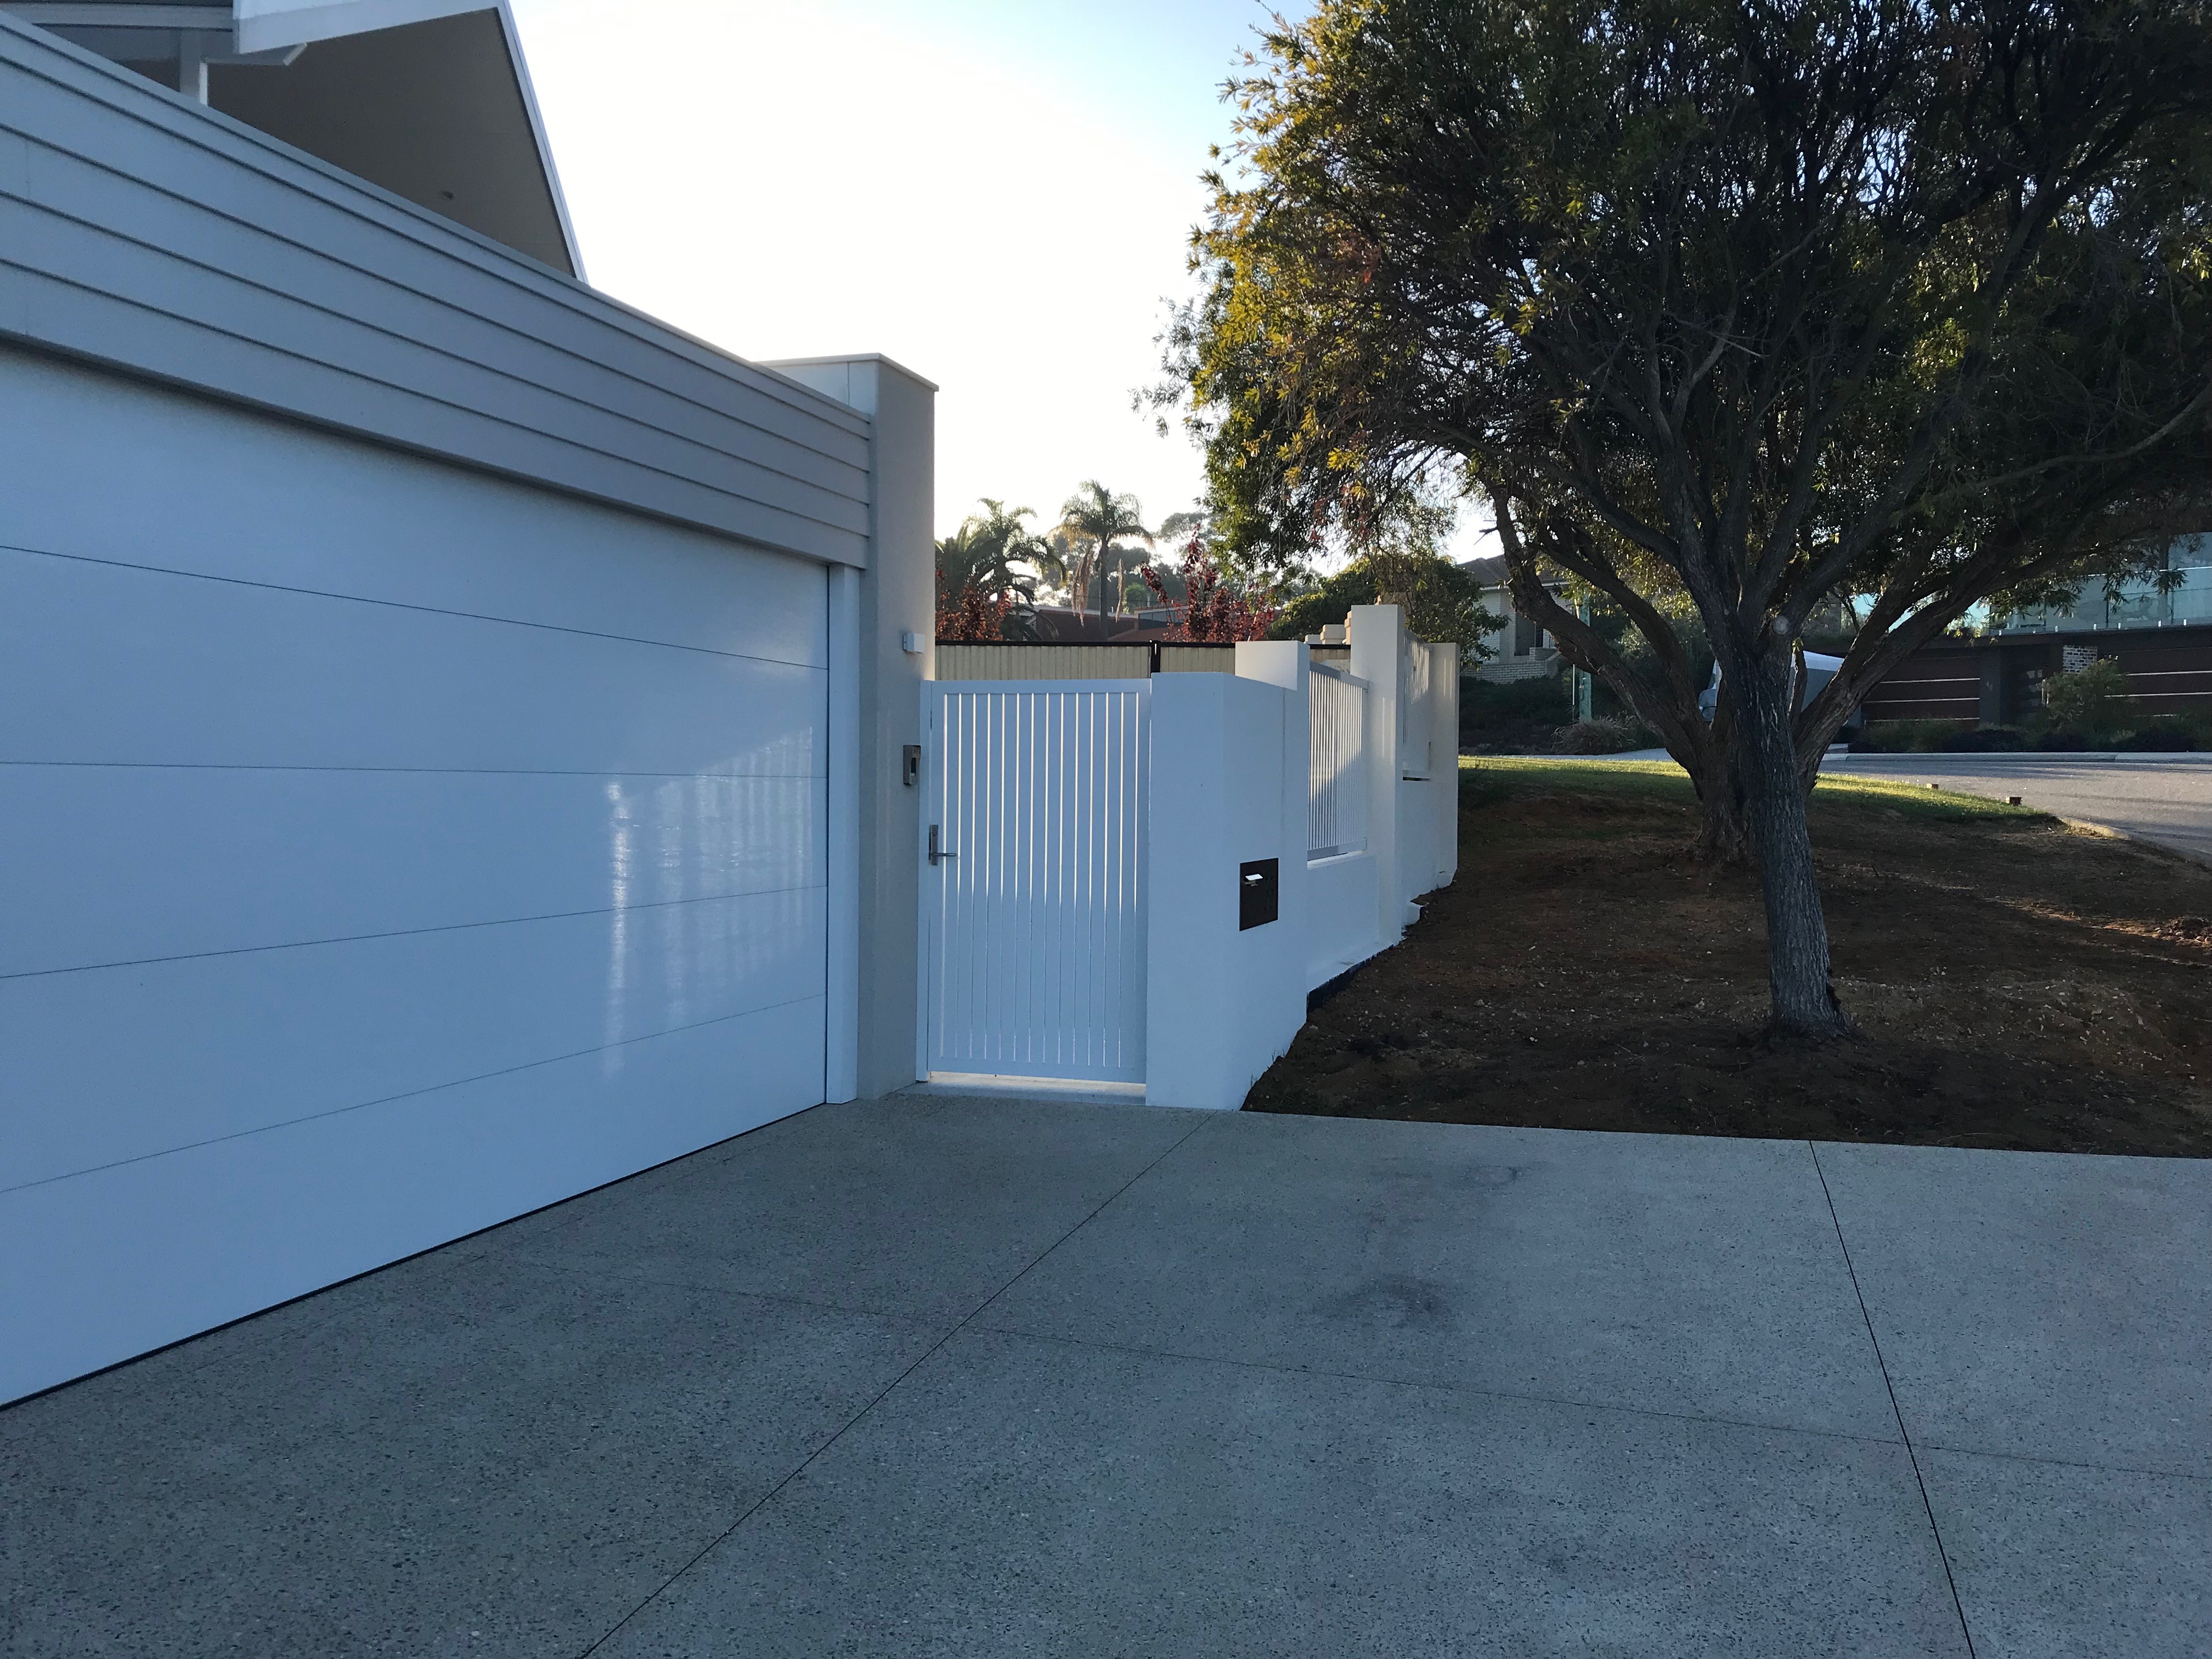 picket fence and gate - white - letterbox